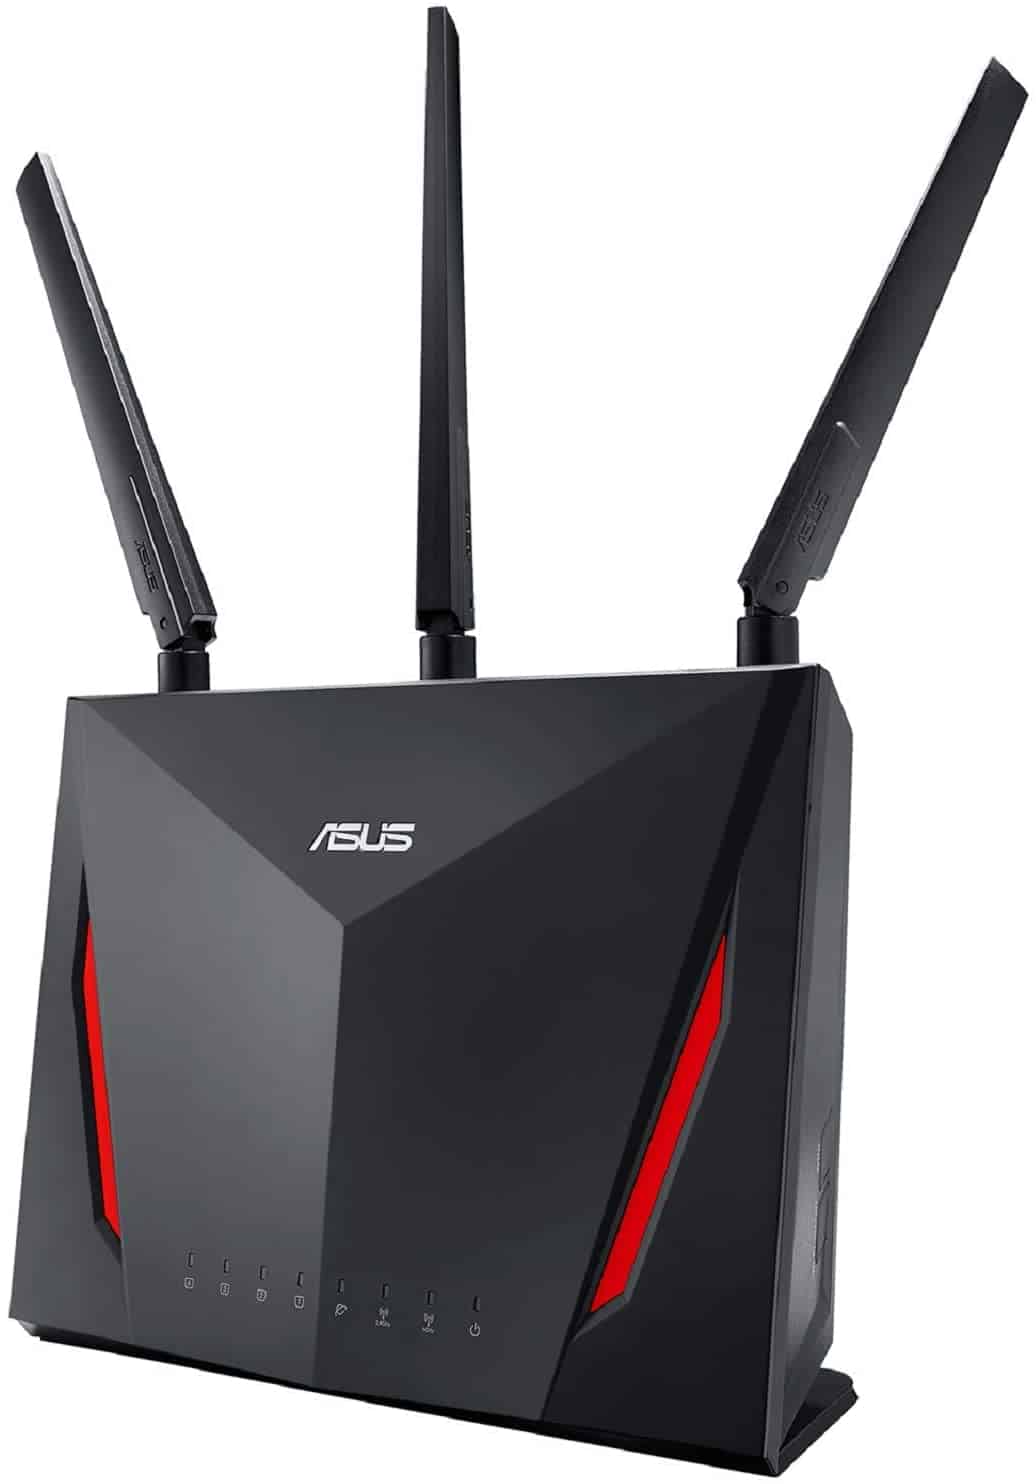 ASUS RT-AC86U Router: The best Asus Routers for gaming for thick walls